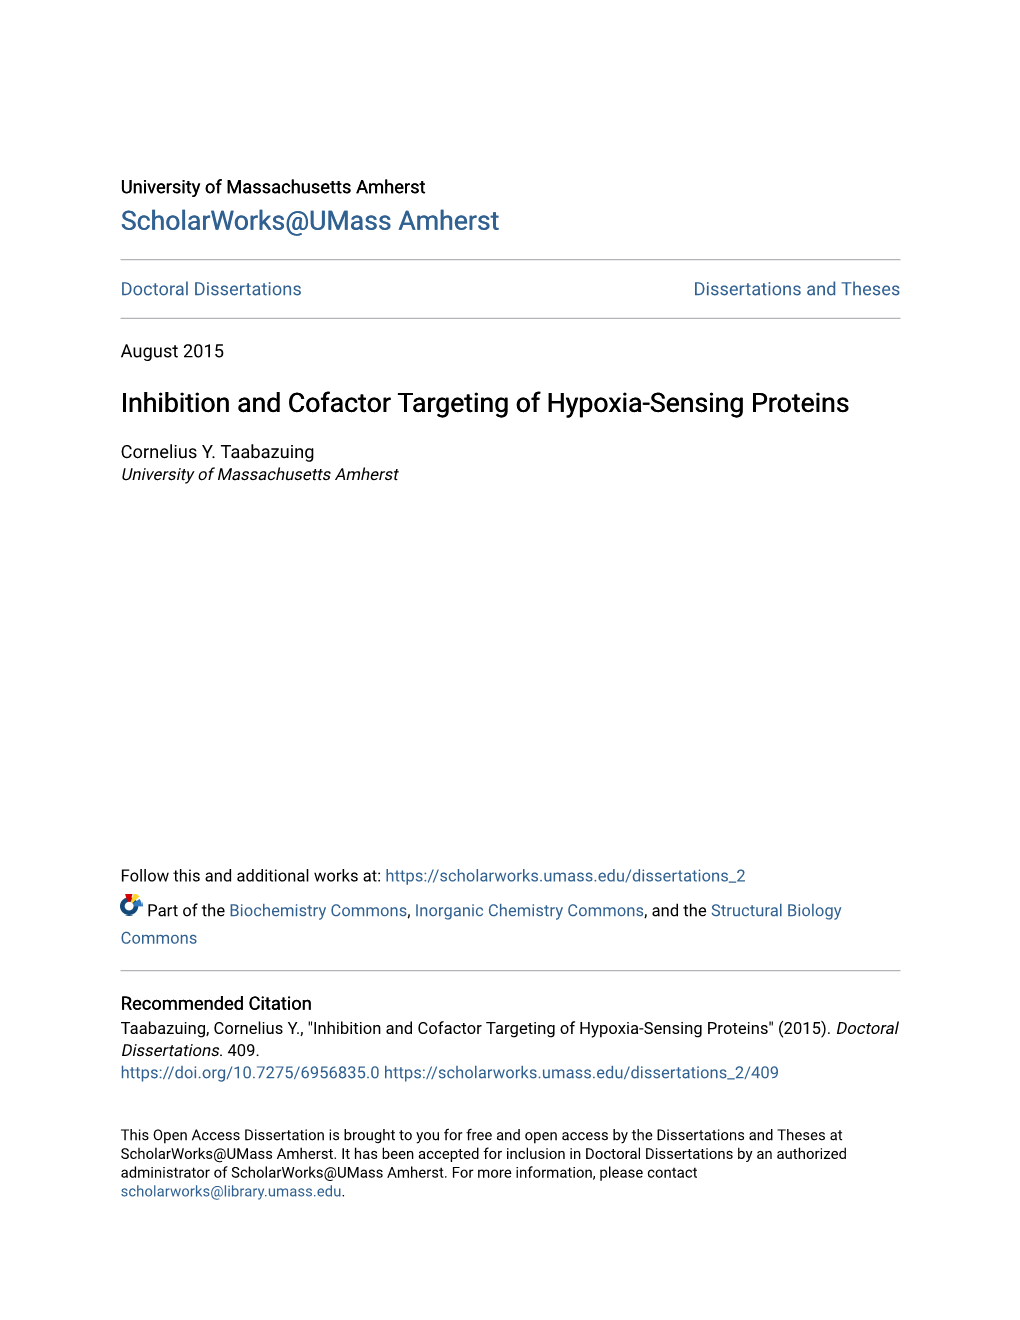 Inhibition and Cofactor Targeting of Hypoxia-Sensing Proteins